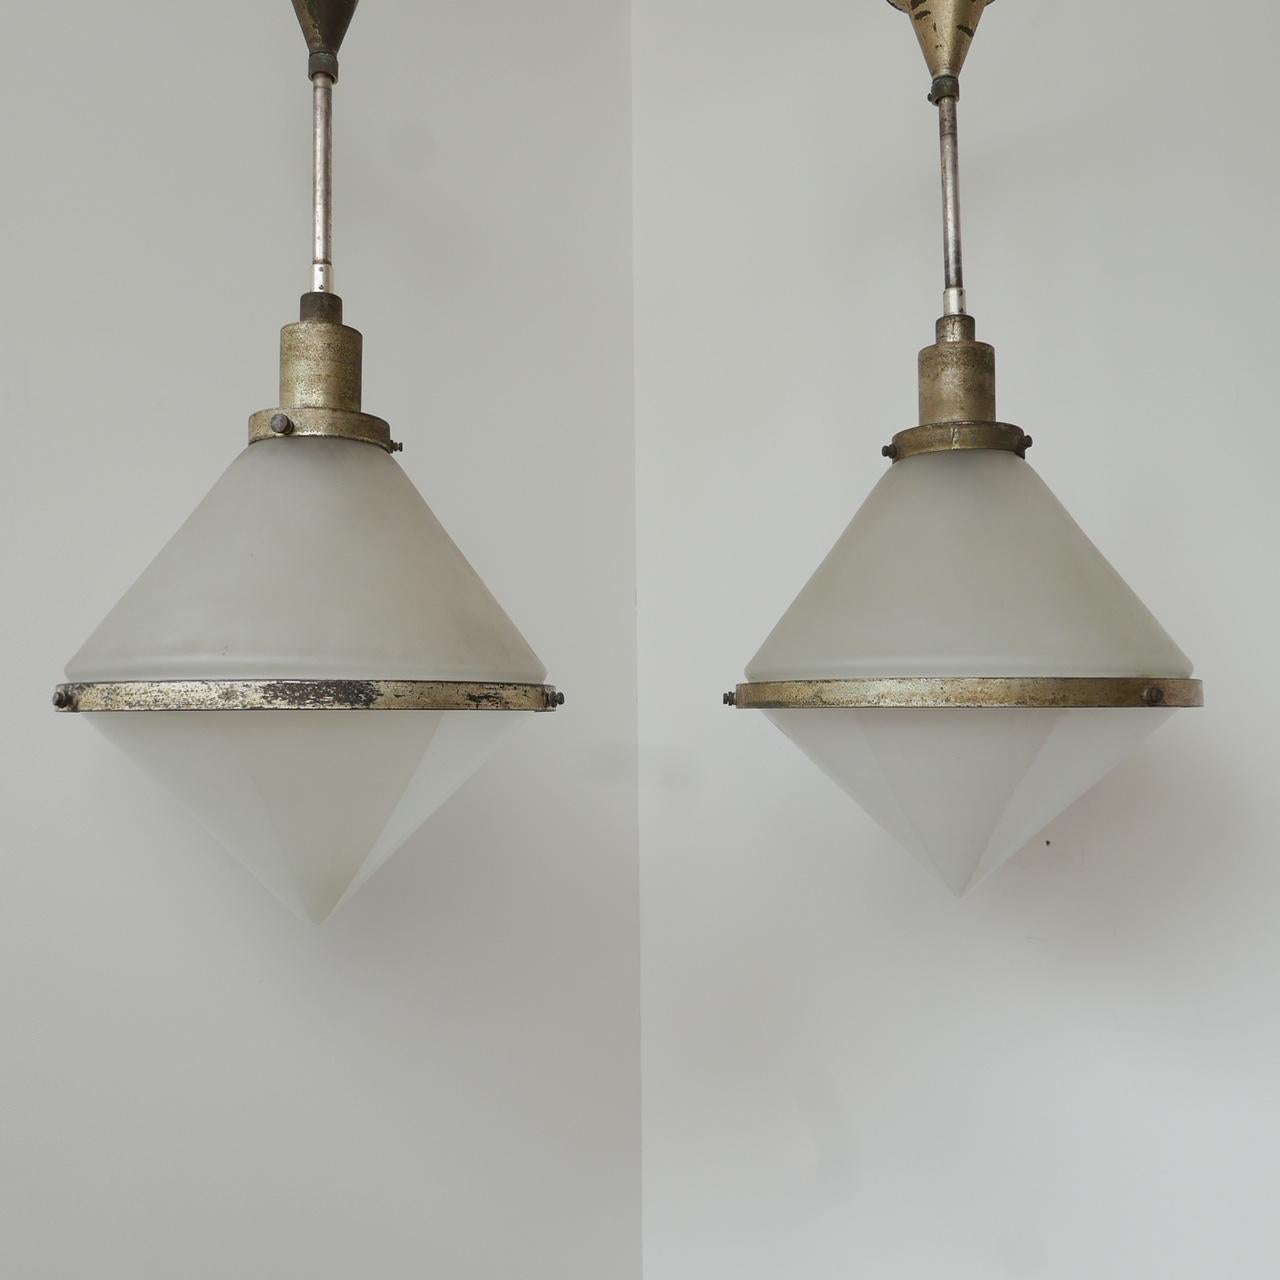 Early 20th Century Pair of Exceptionally Rare Peter Behrens Pendants